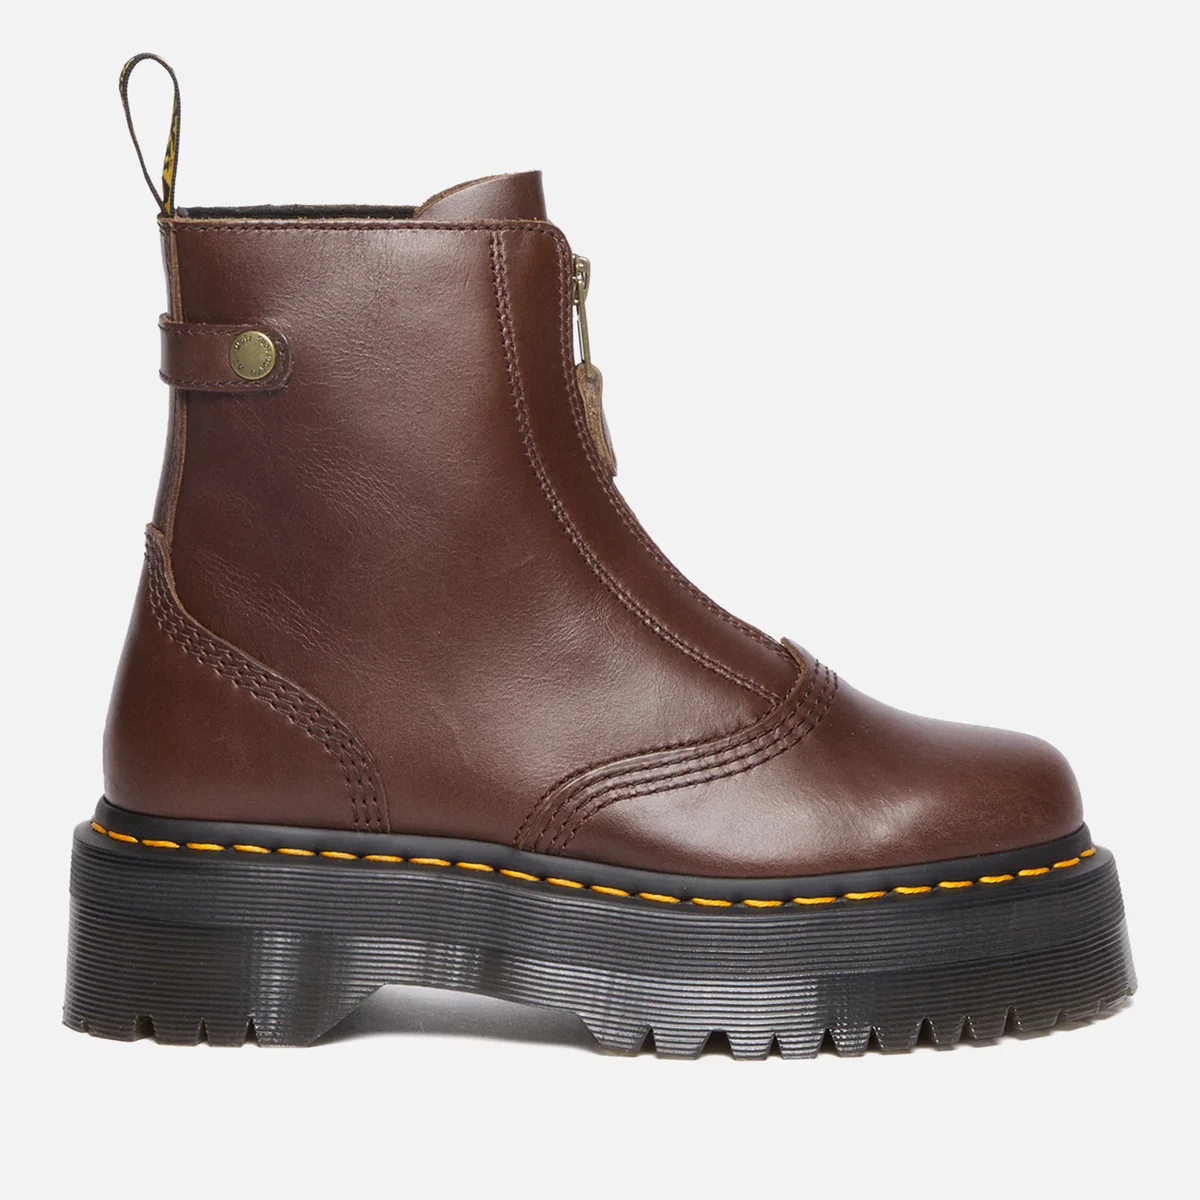 Dr. Martens Women's Jetta Leather Boots Image 1